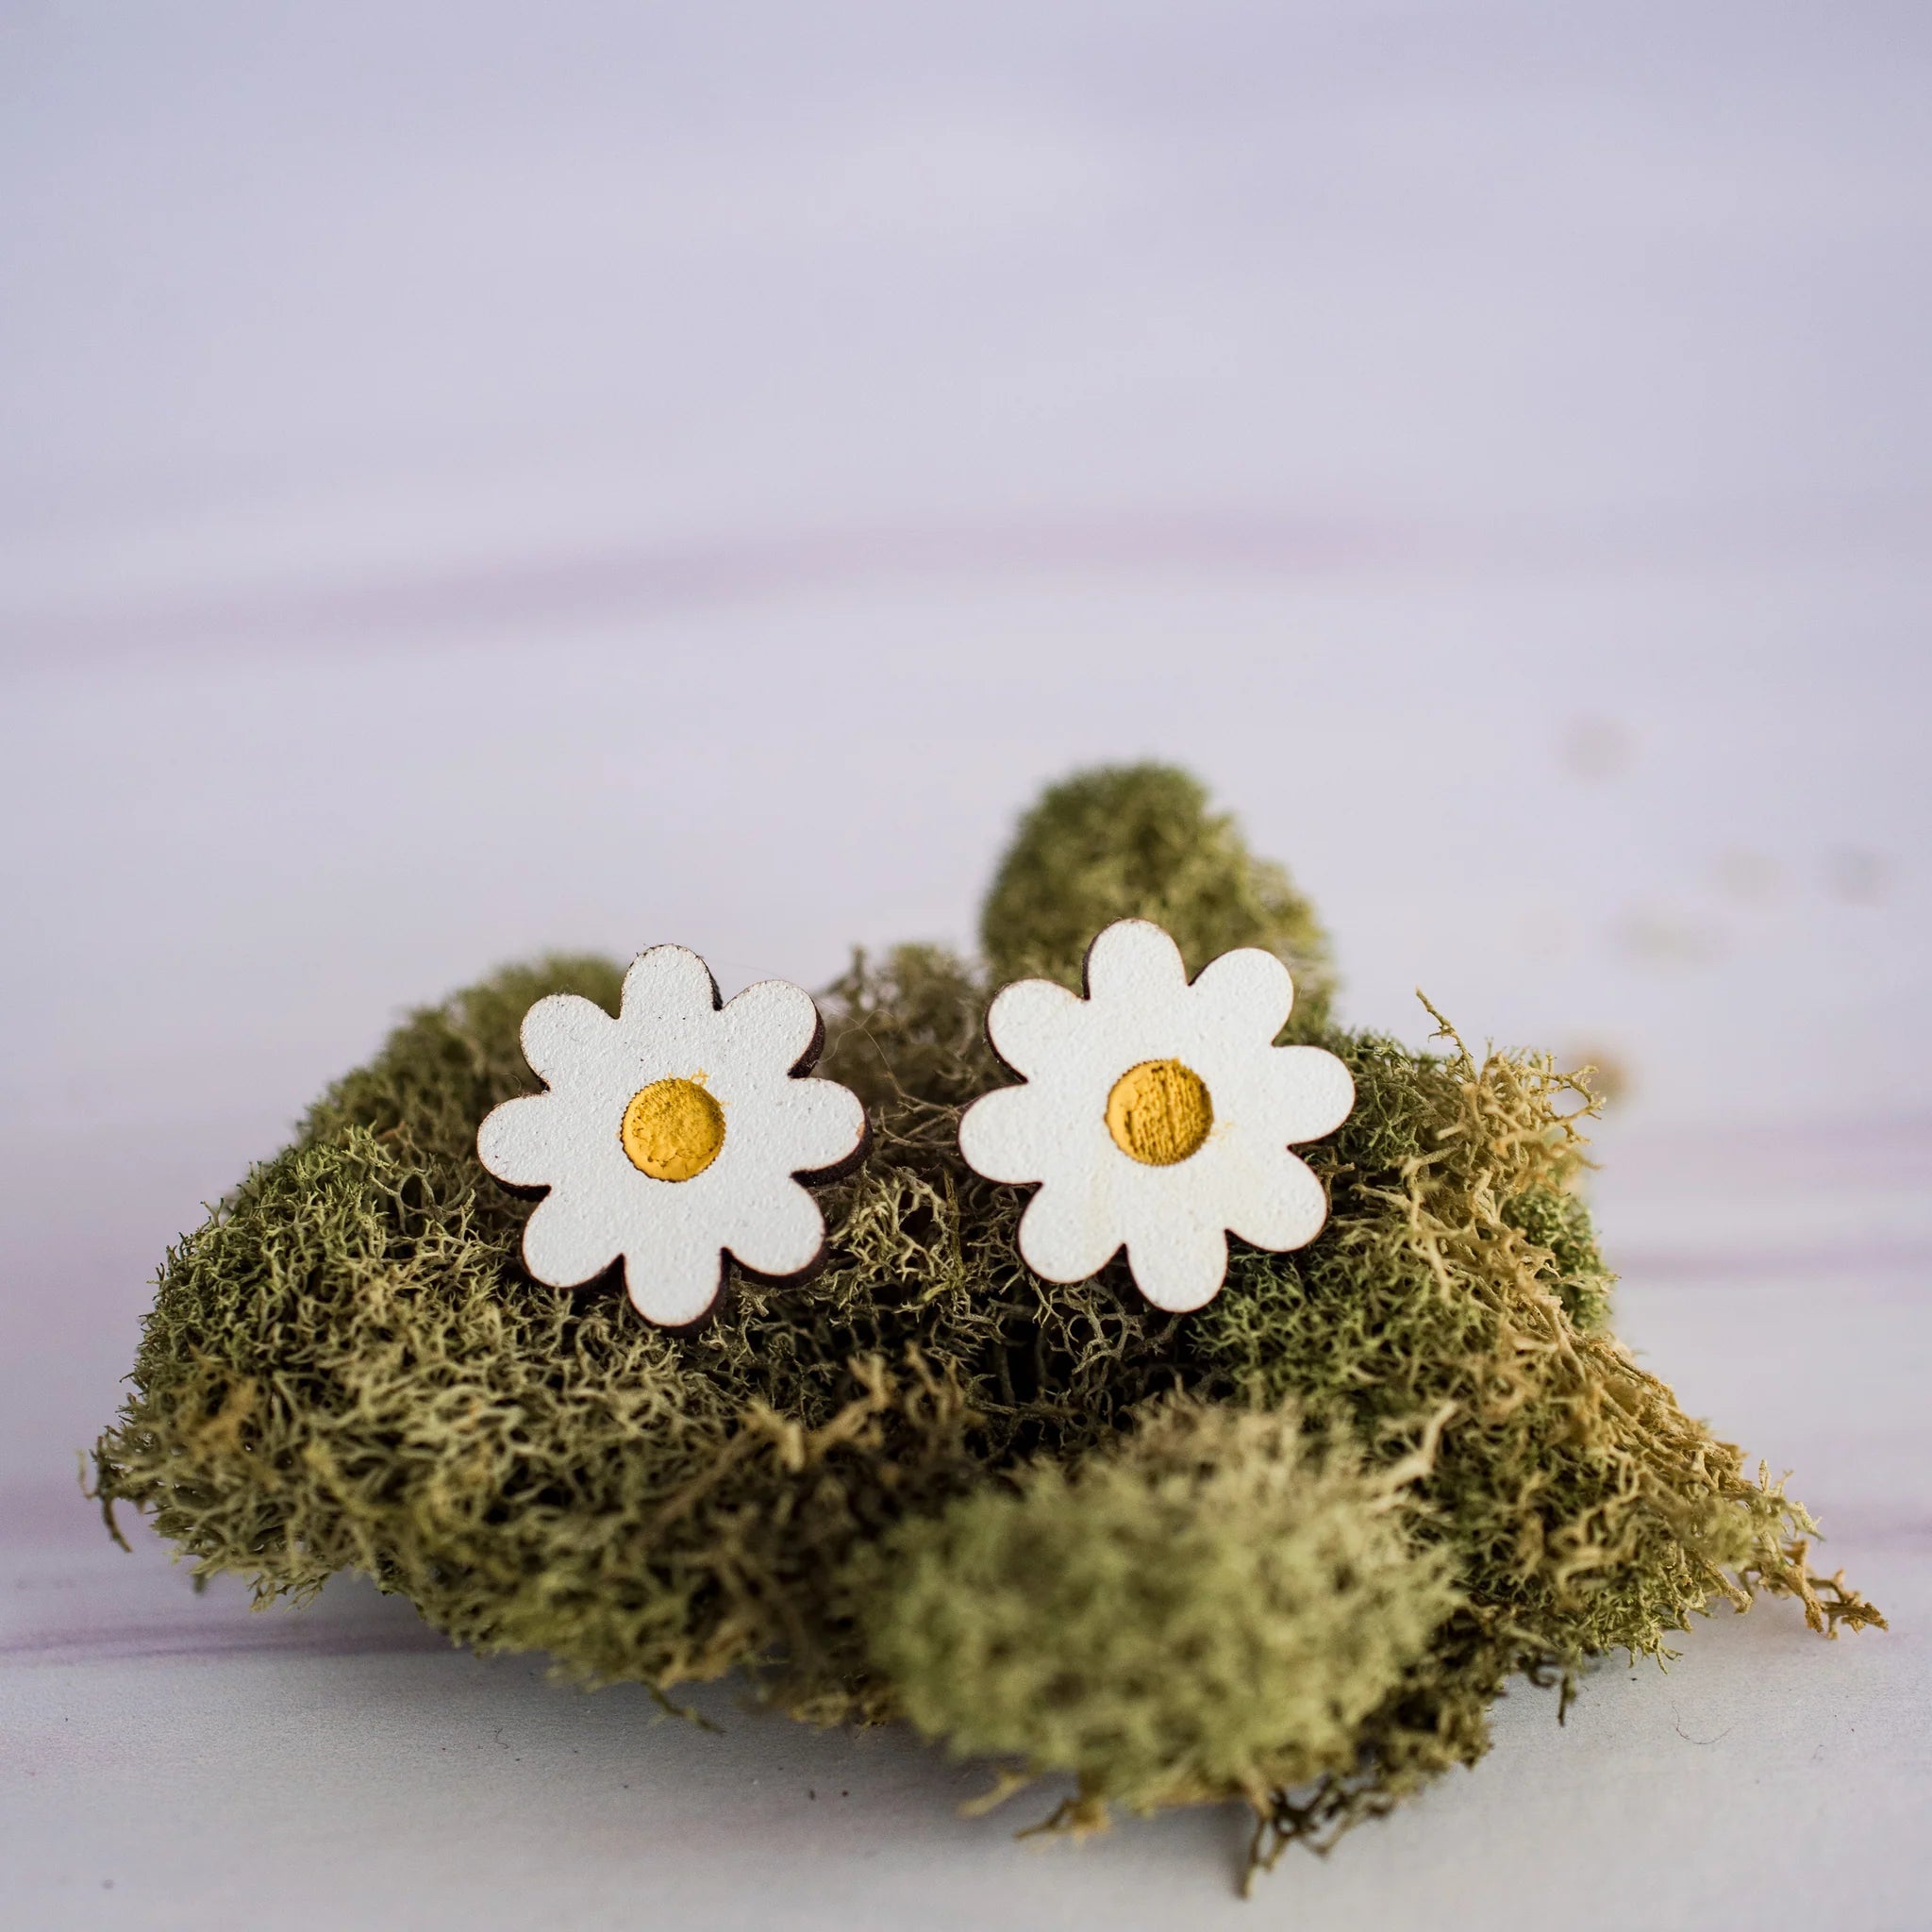 Shop Hand-Painted Daisy Stud Earrings-Earrings at Ruby Joy Boutique, a Women's Clothing Store in Pickerington, Ohio